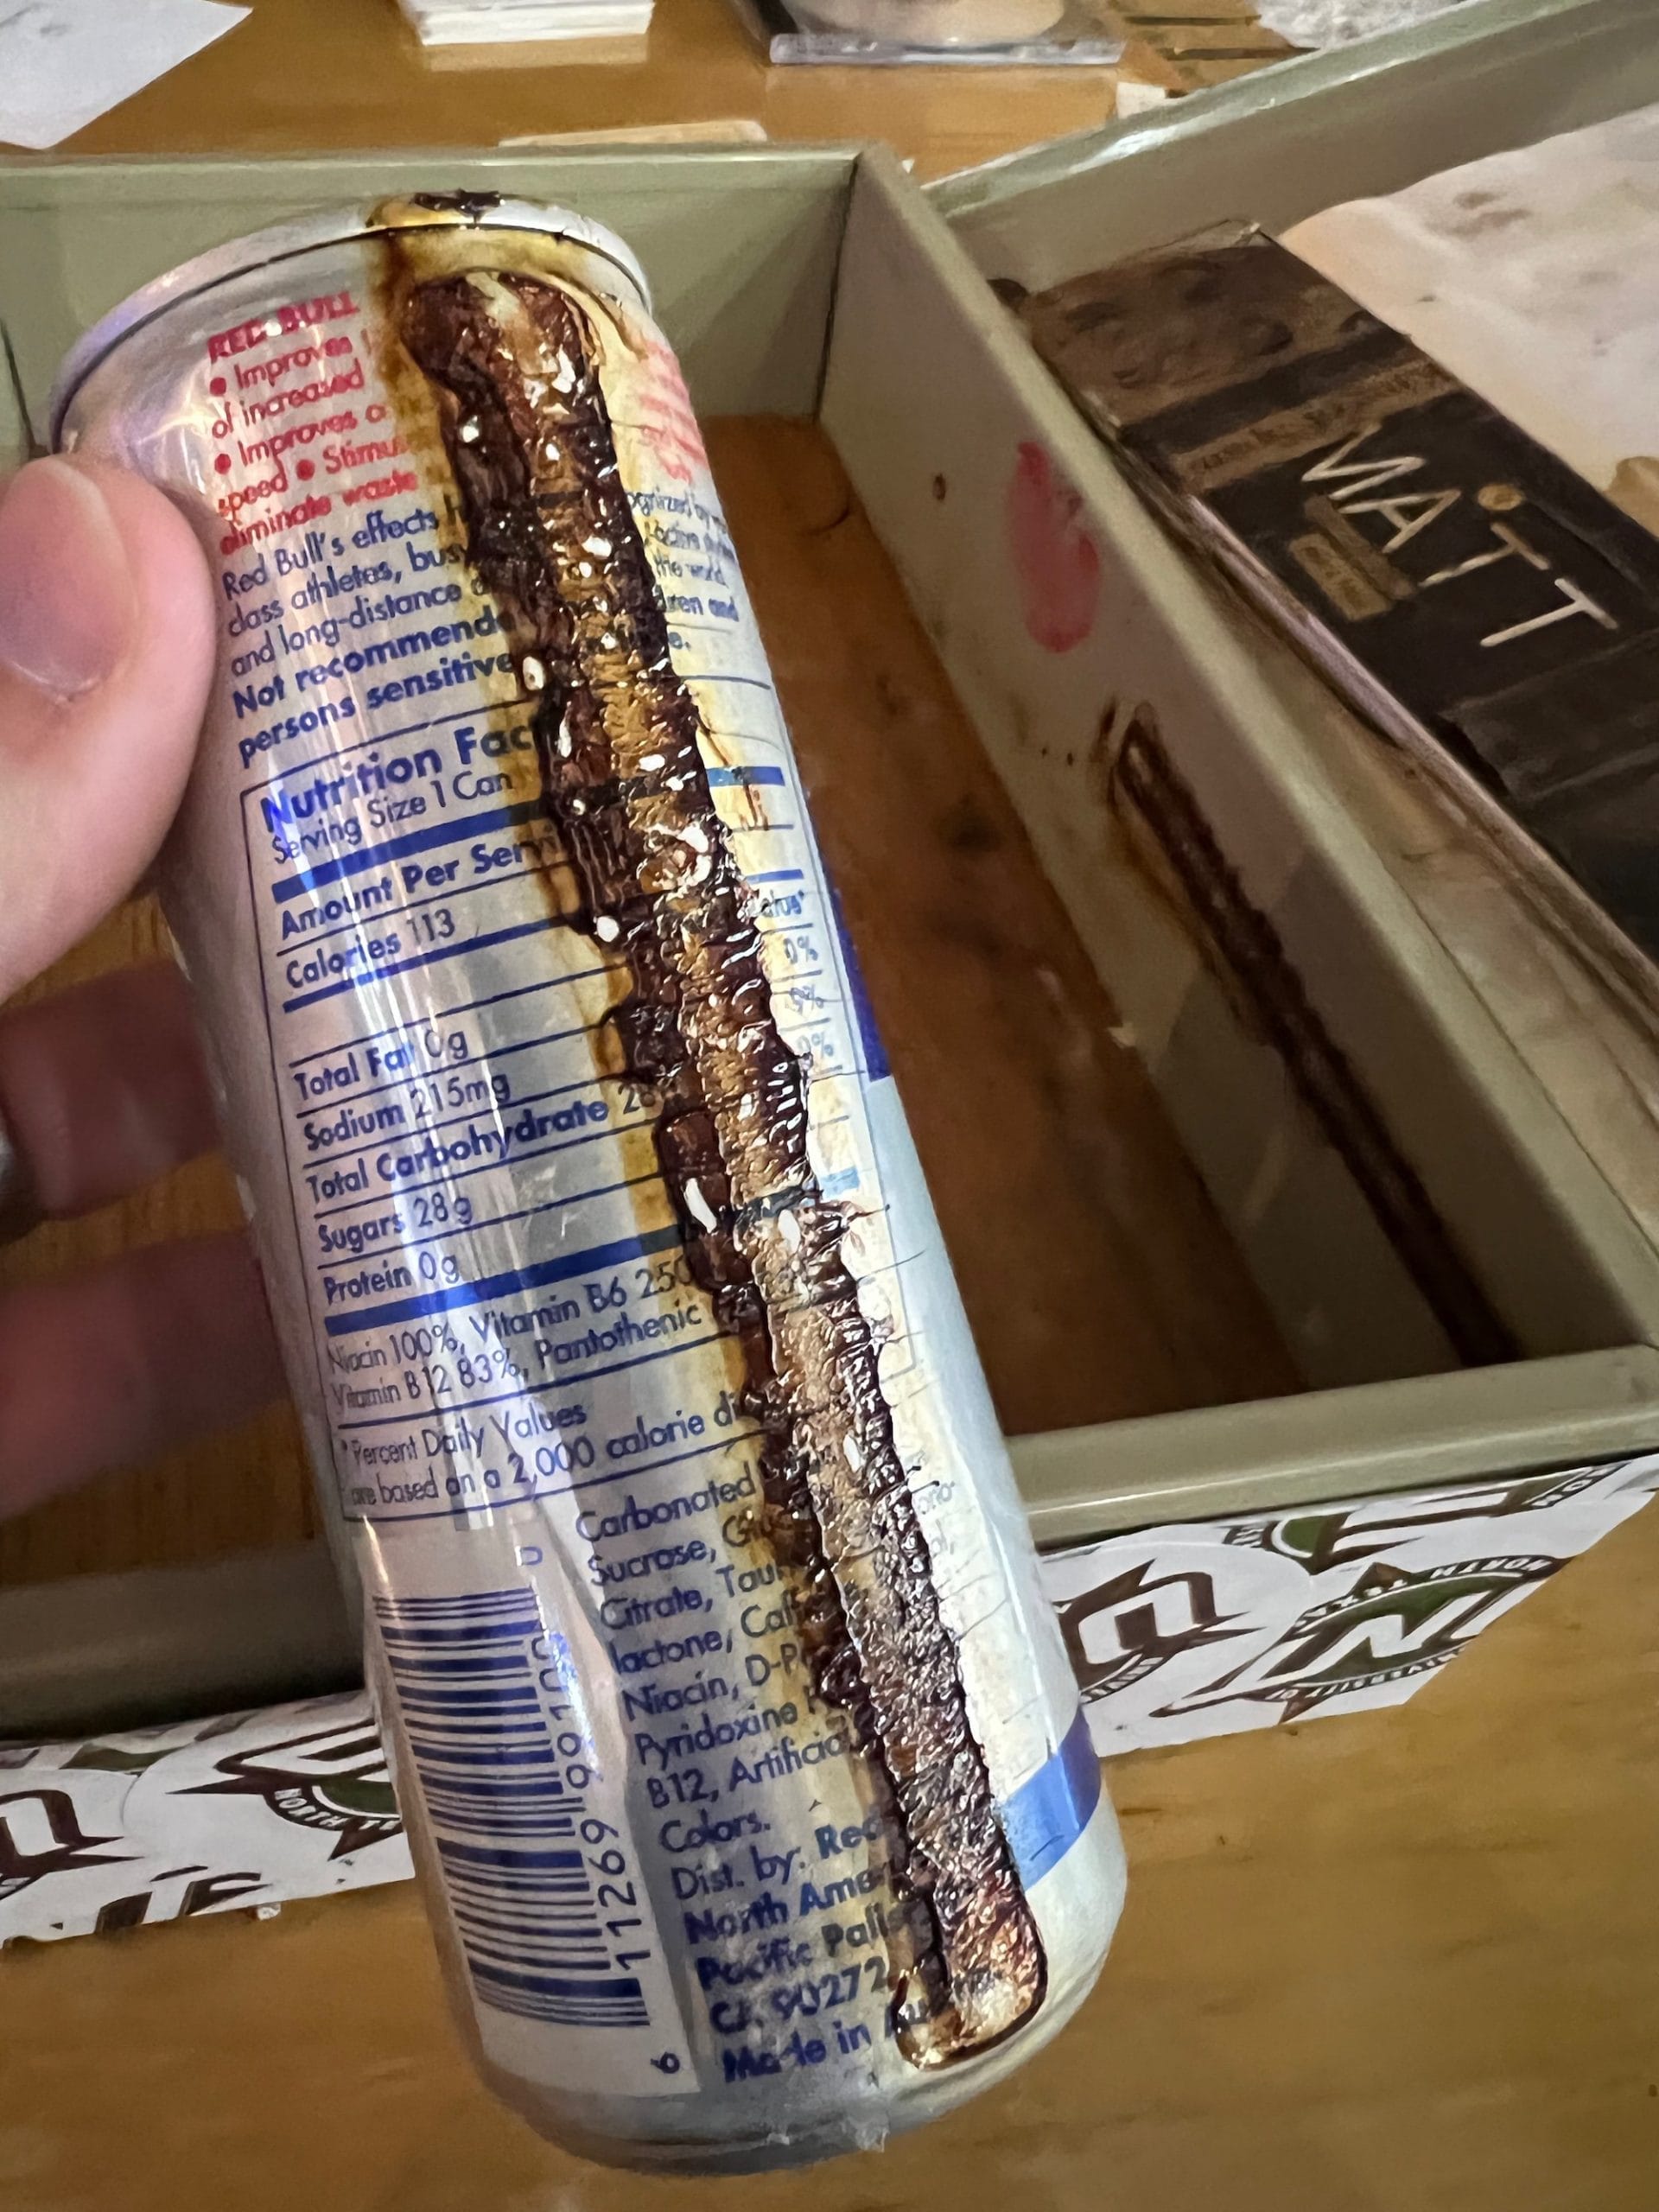 Can of Red Bull energy drink, encrusted with decades-old sugar.